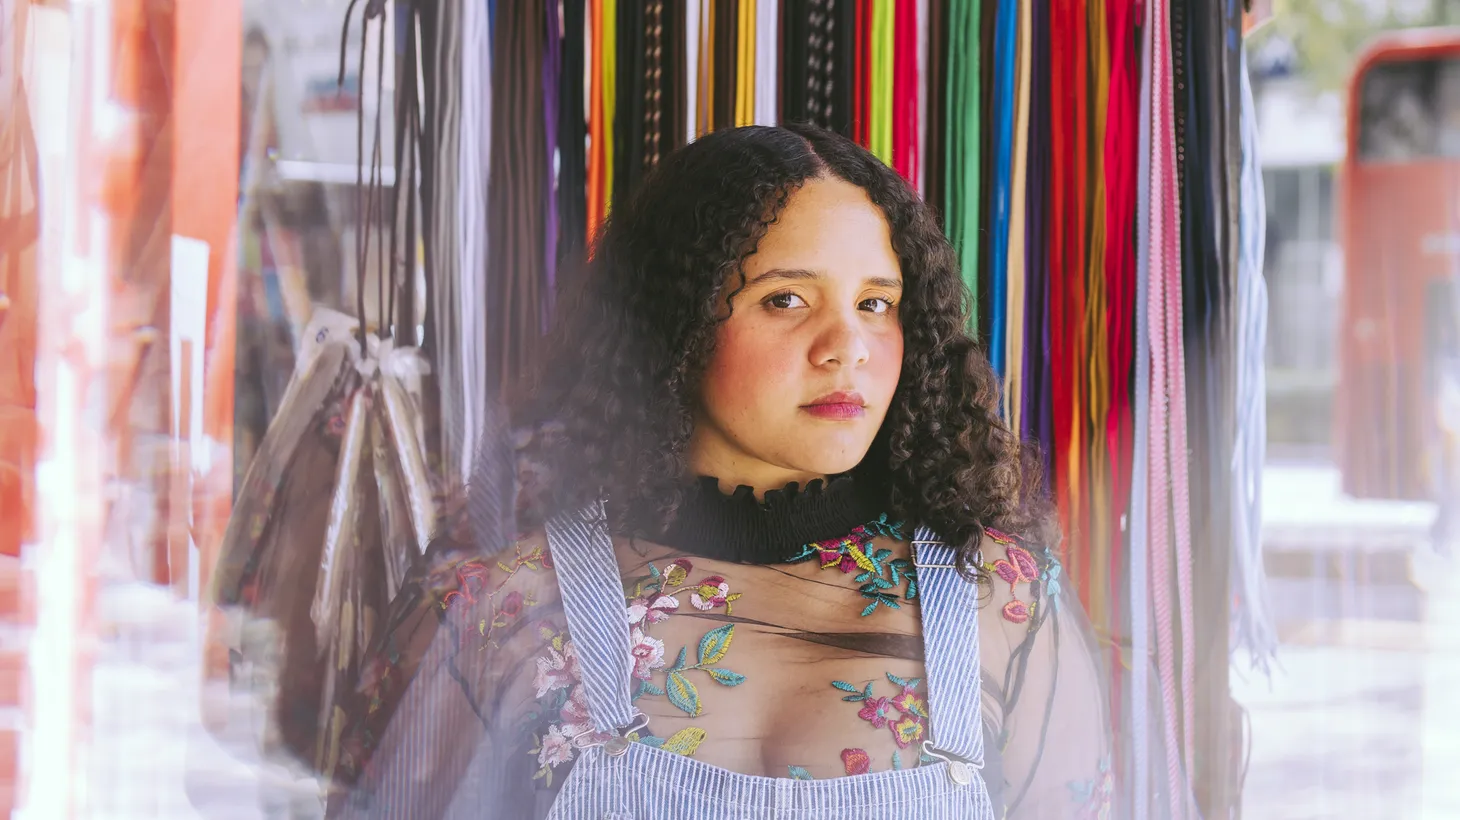 Lido Pimienta ’s “He Venido Al Mar,” or “I’ve Come Down to the Sea” in English, was written for the protagonist in the film Calladita aka The Quiet Maid, a story of a hard- working Colombian migrant working for a wealthy family.